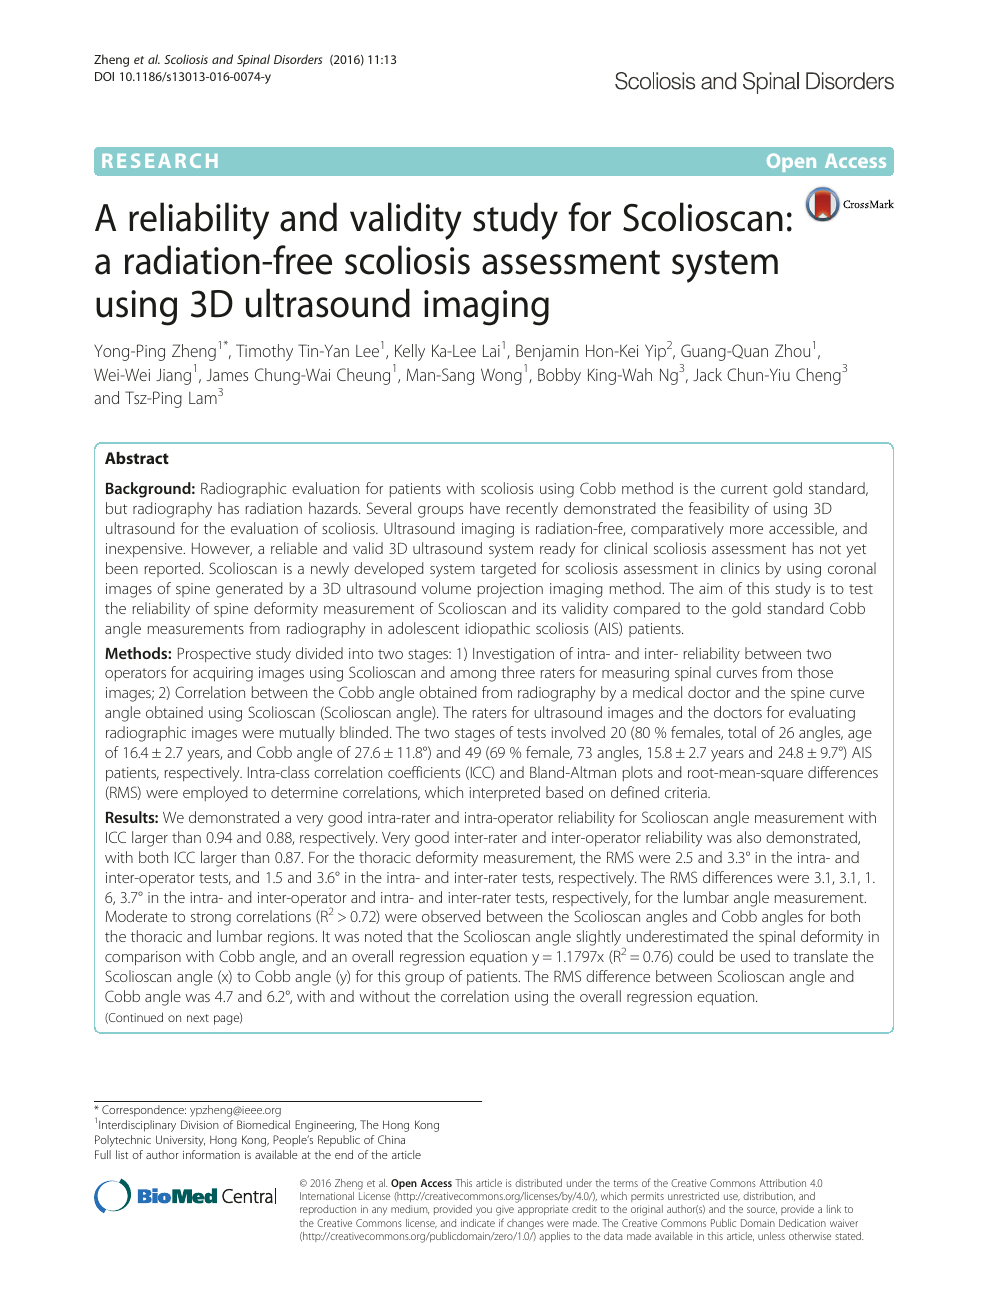 A reliability and validity study for Scolioscan: a radiation-free ...